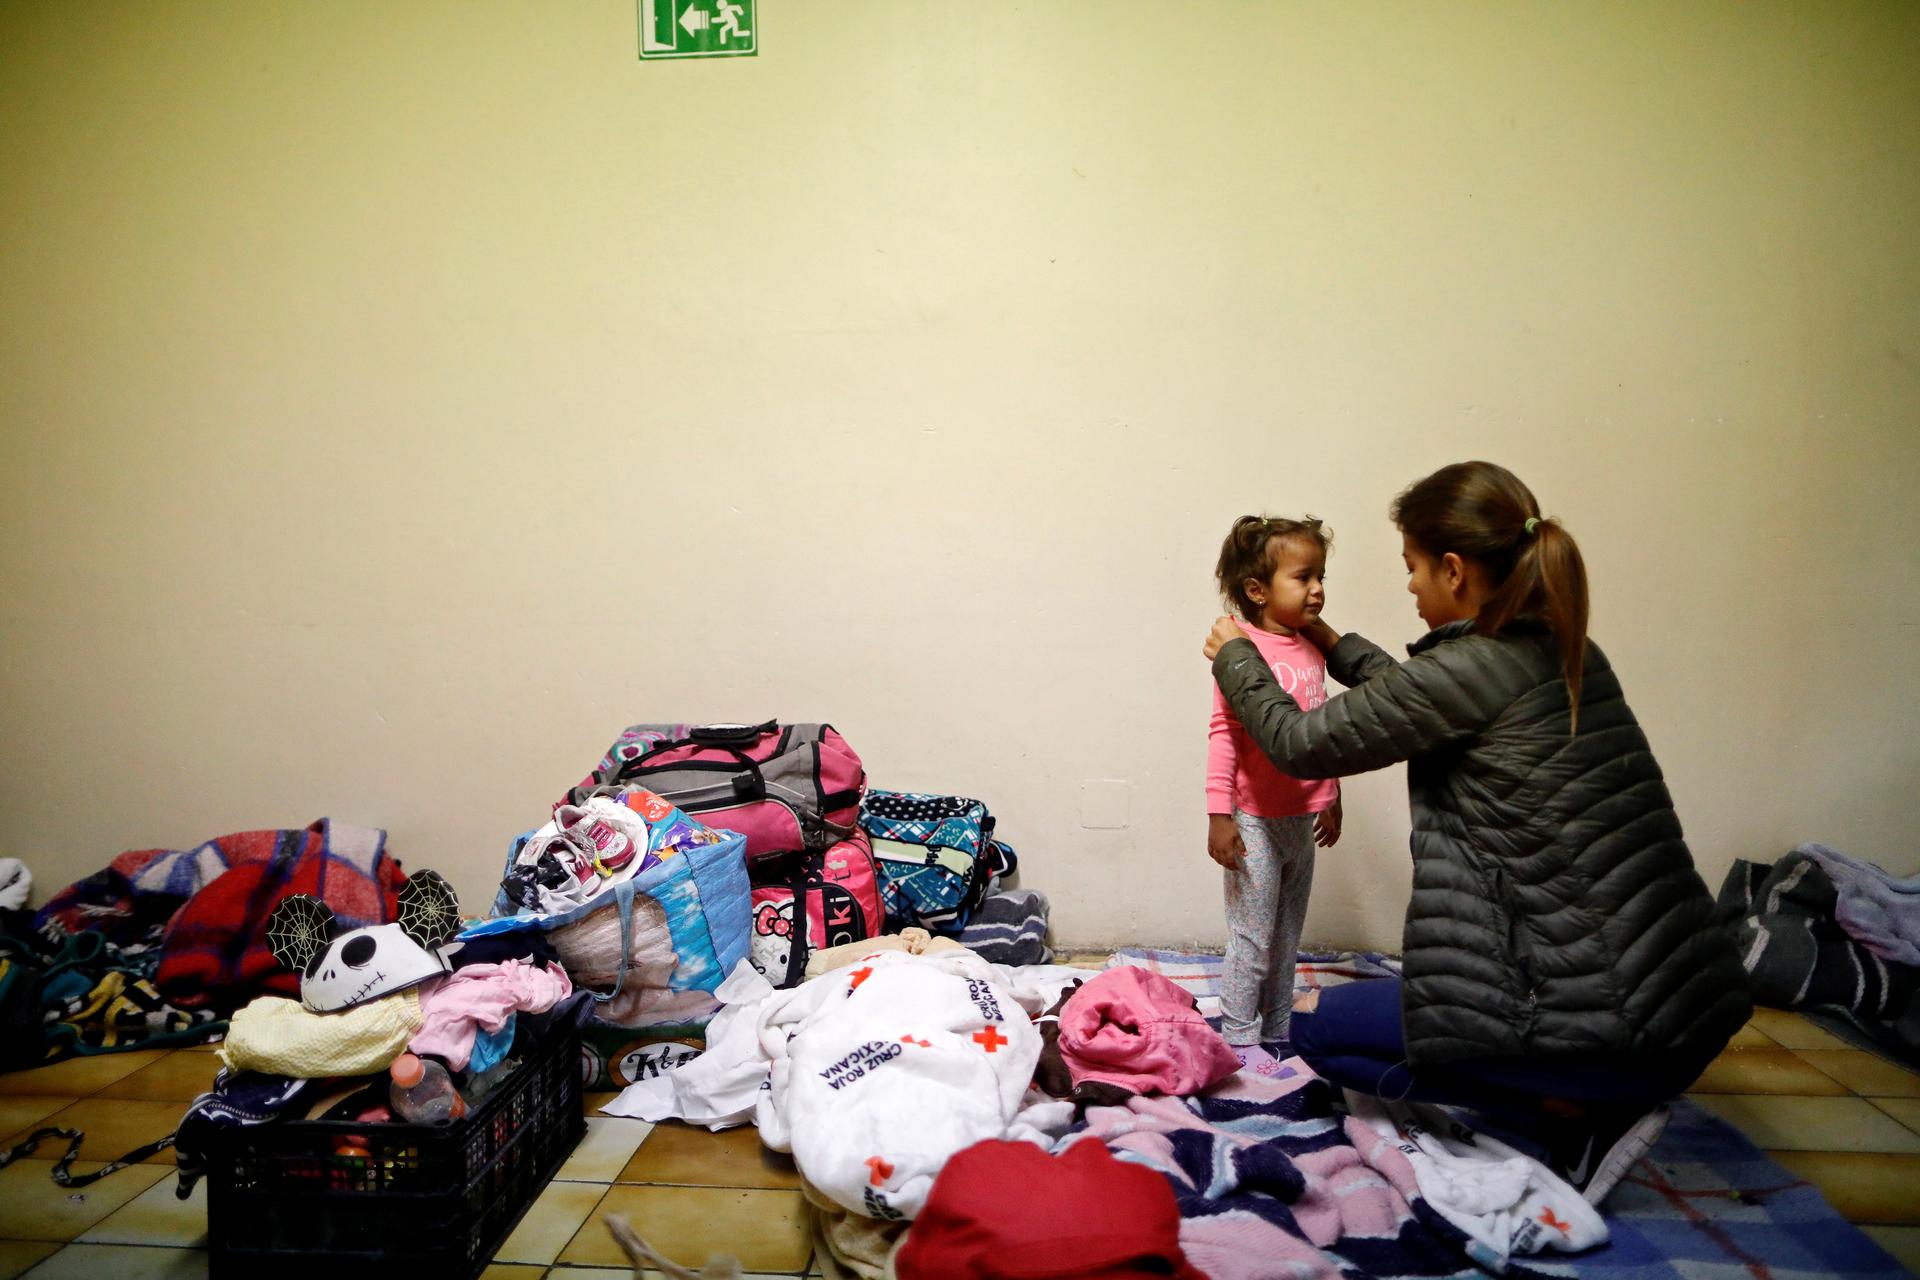 A woman dresses a girl at a shelter, surrounded by luggage and clothes